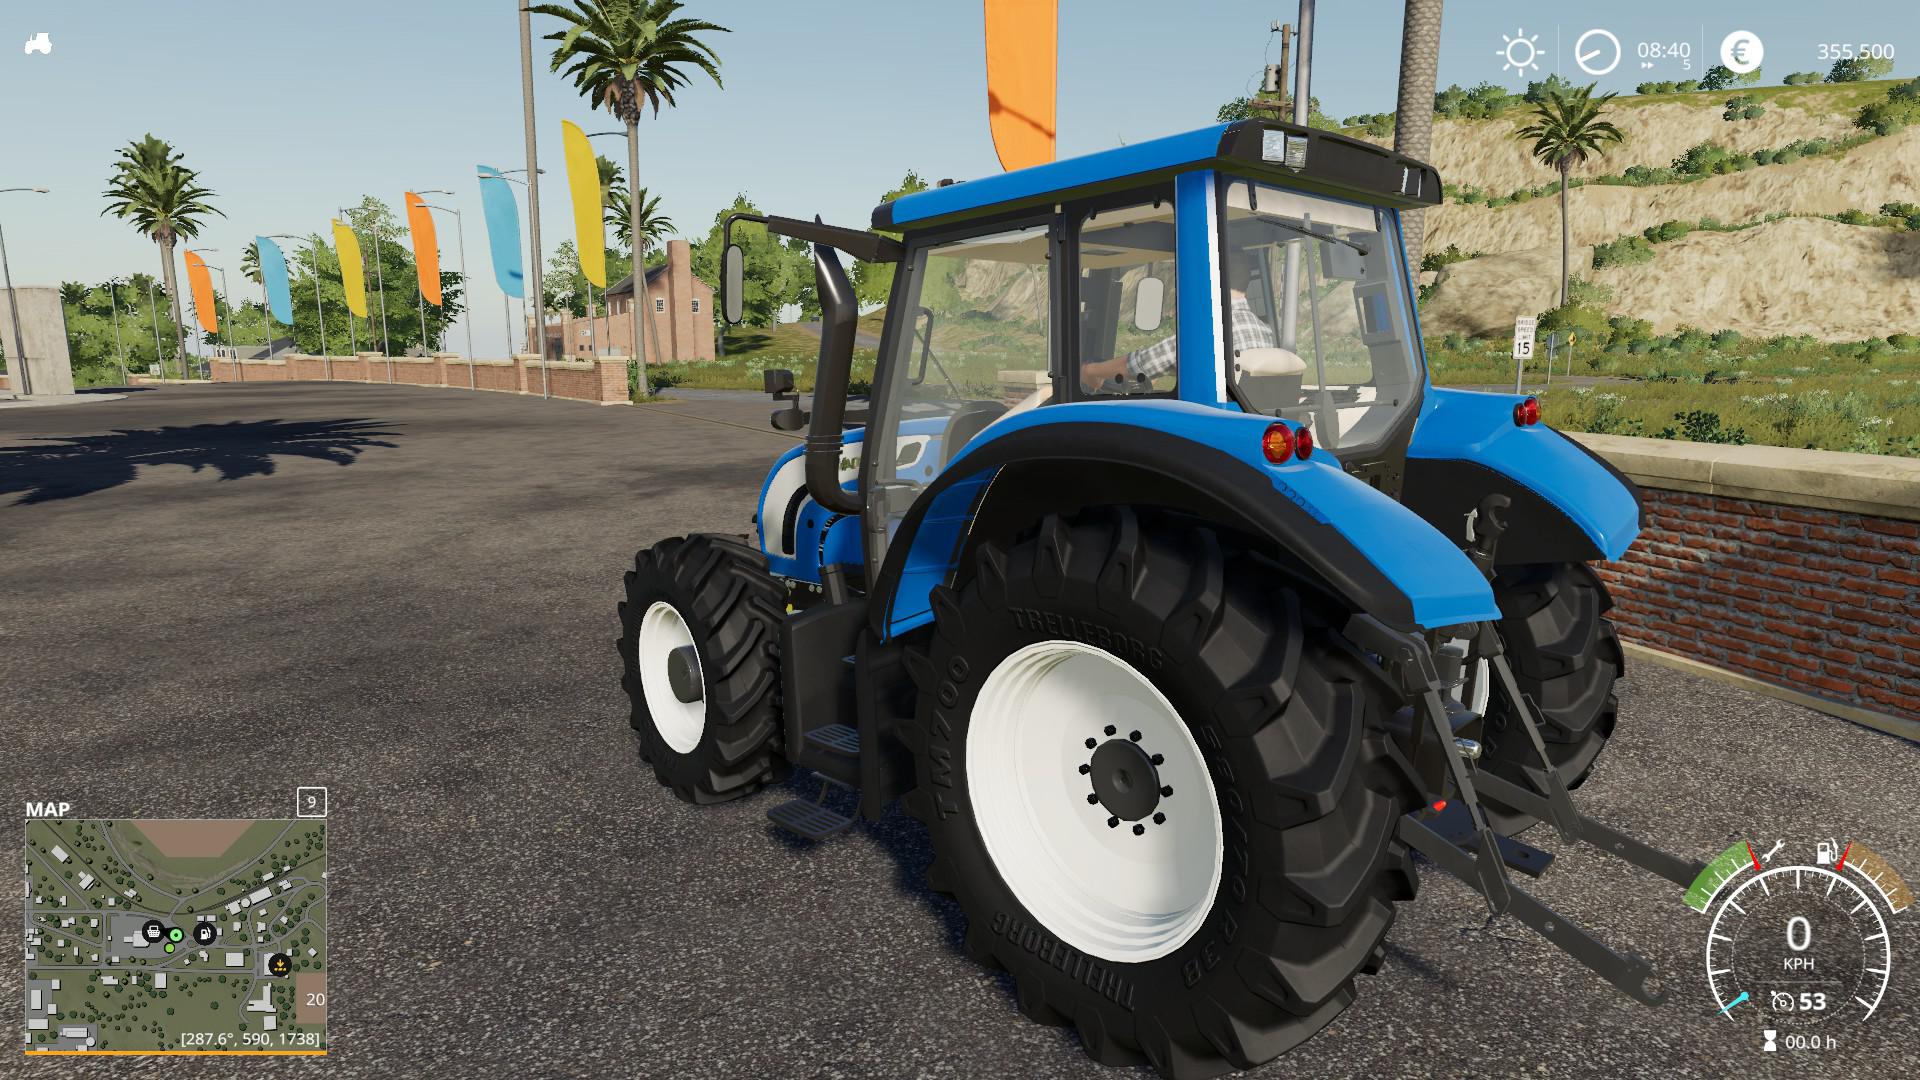 Fs19 Old Valtra N142 Tractor Farming Simulator 19 Mods Club 80830 Hot Sex Picture 7413